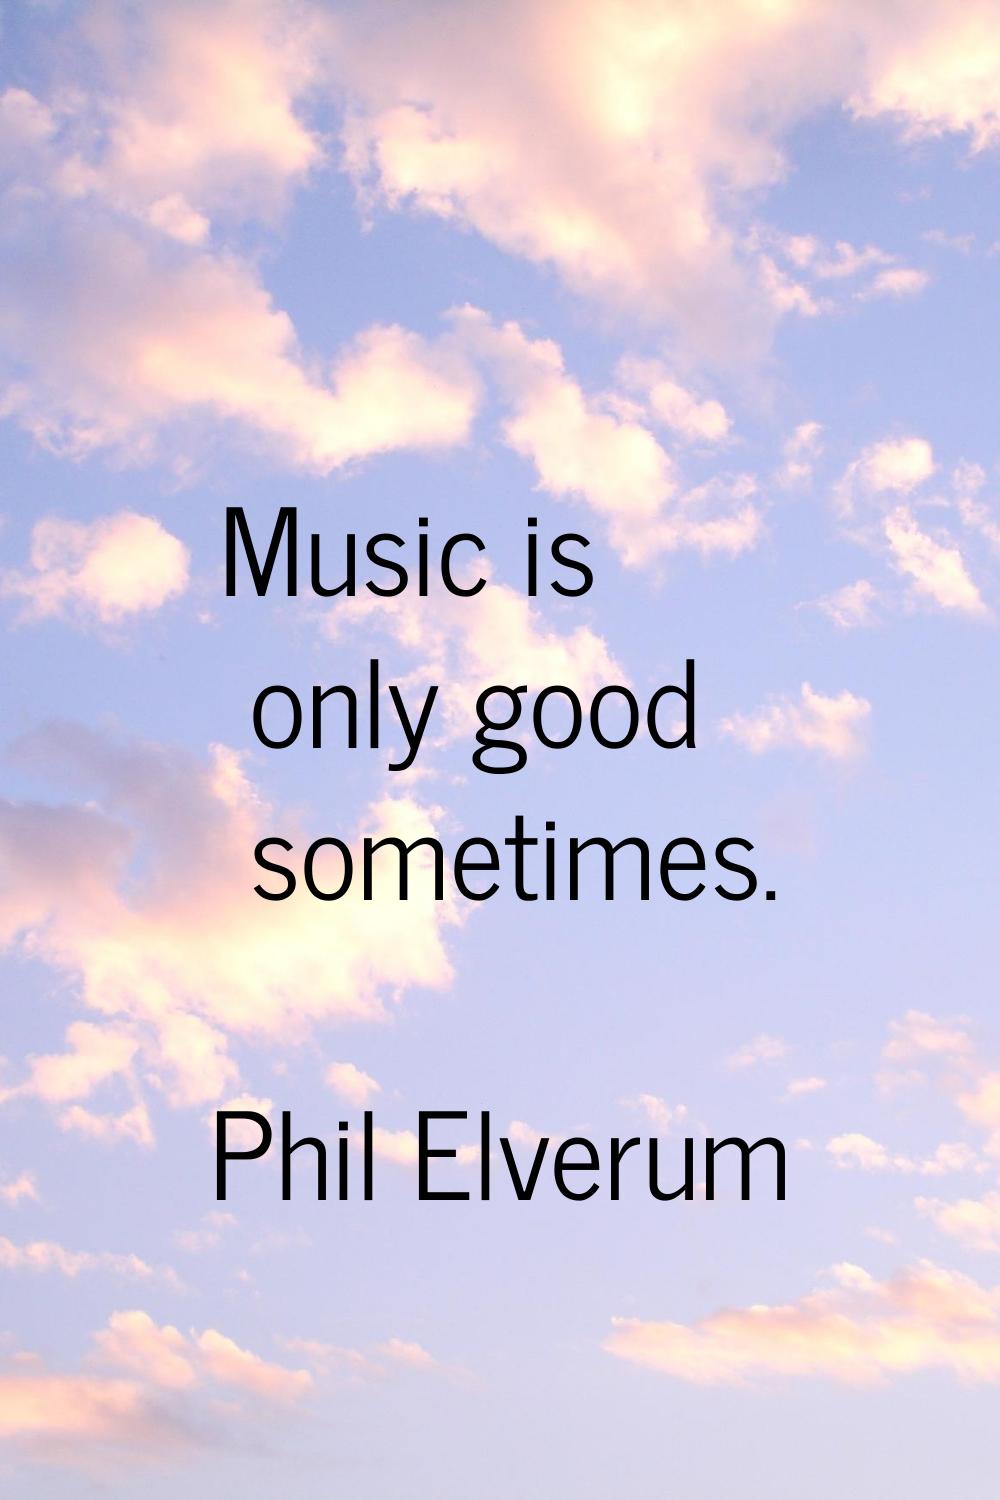 Music is only good sometimes.